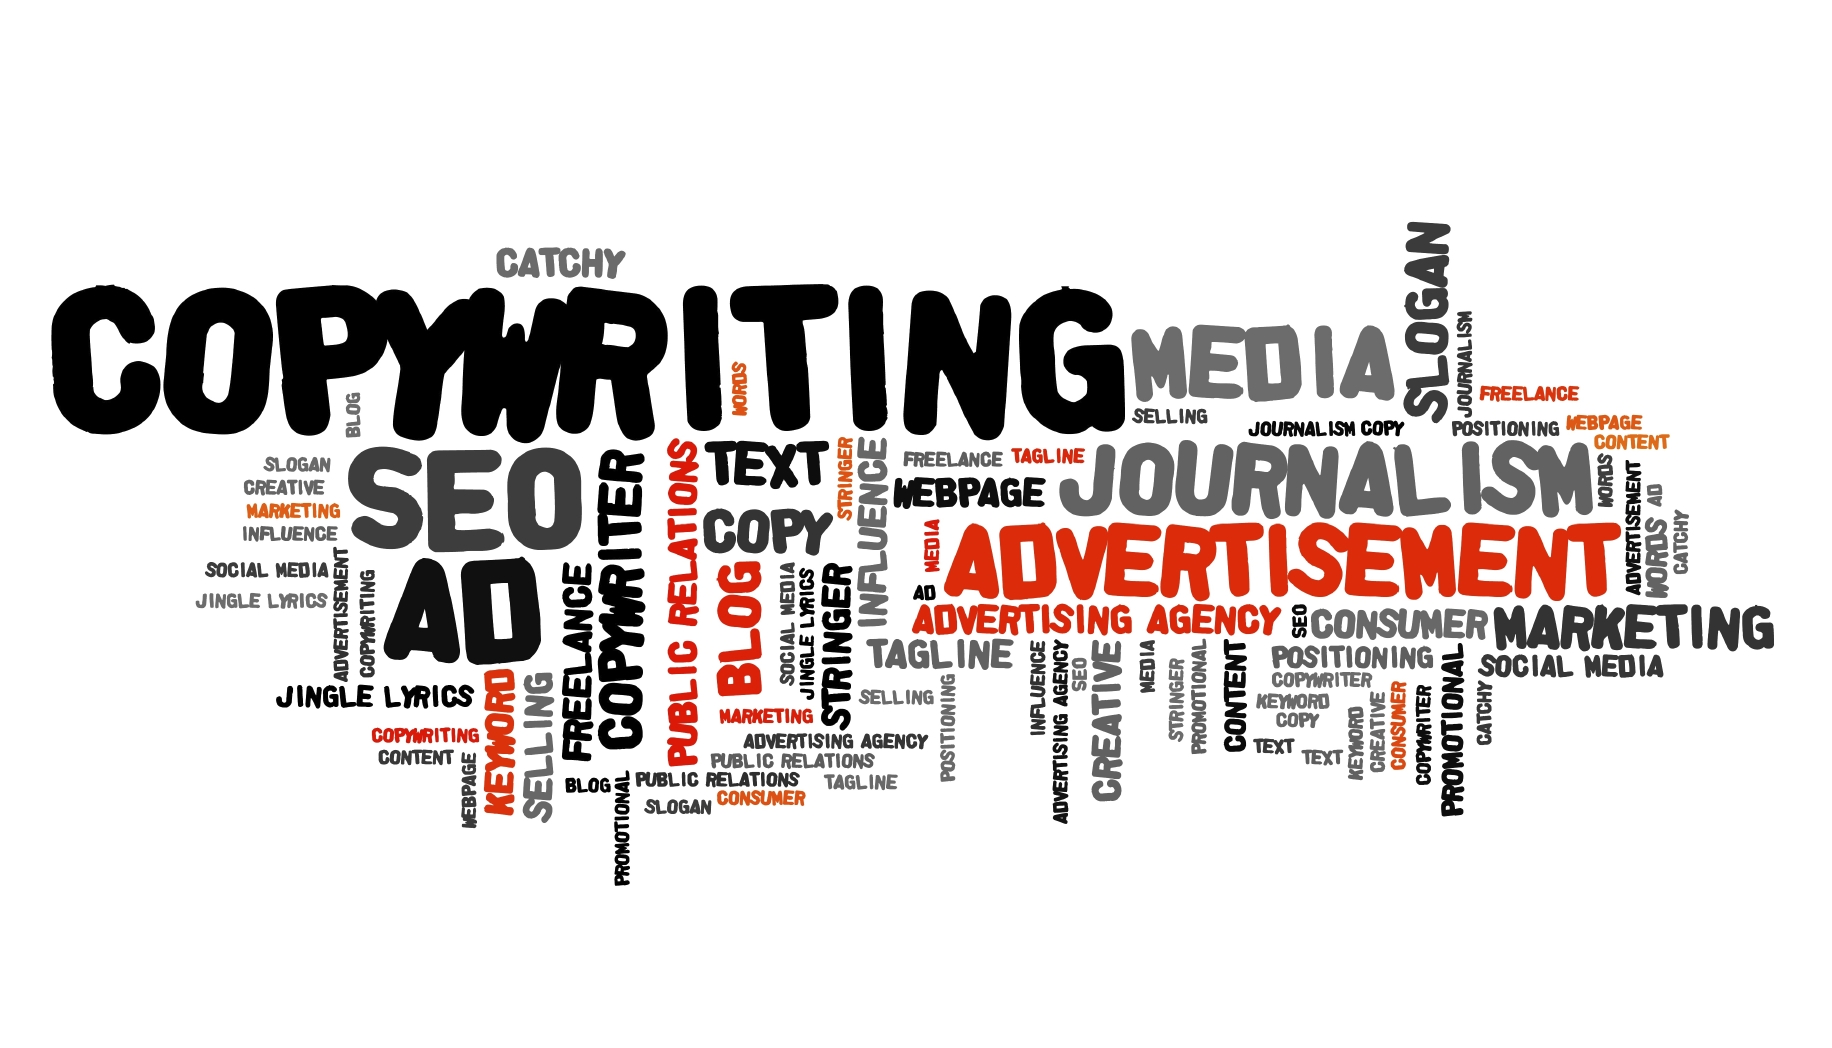 Copywriting - marketing industry issues and concepts tag cloud illustration. Word cloud collage concept.